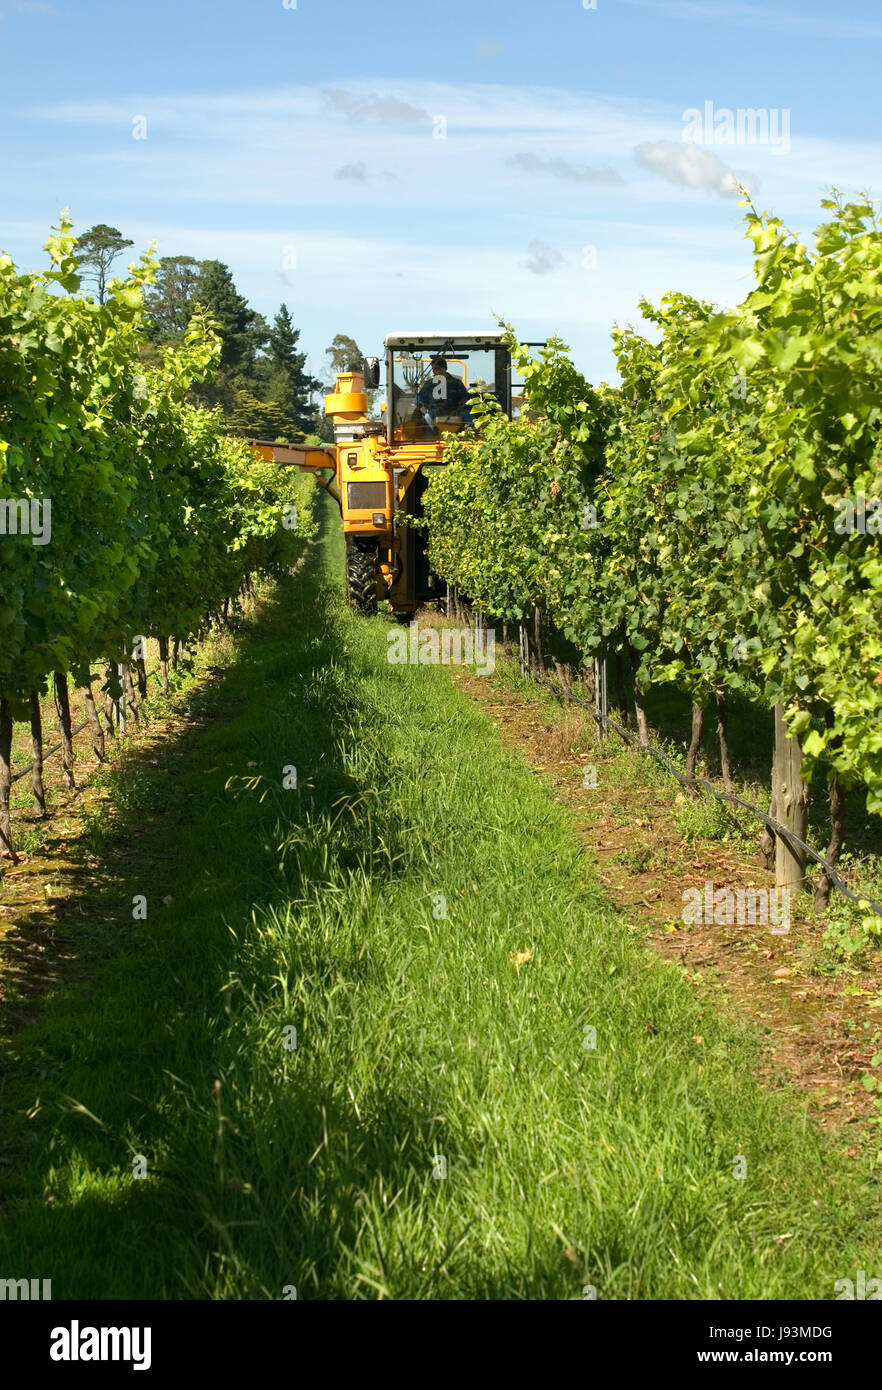 tree, trees, machinery, leaves, agriculture, farming, grapes, harvest, Stock Photo